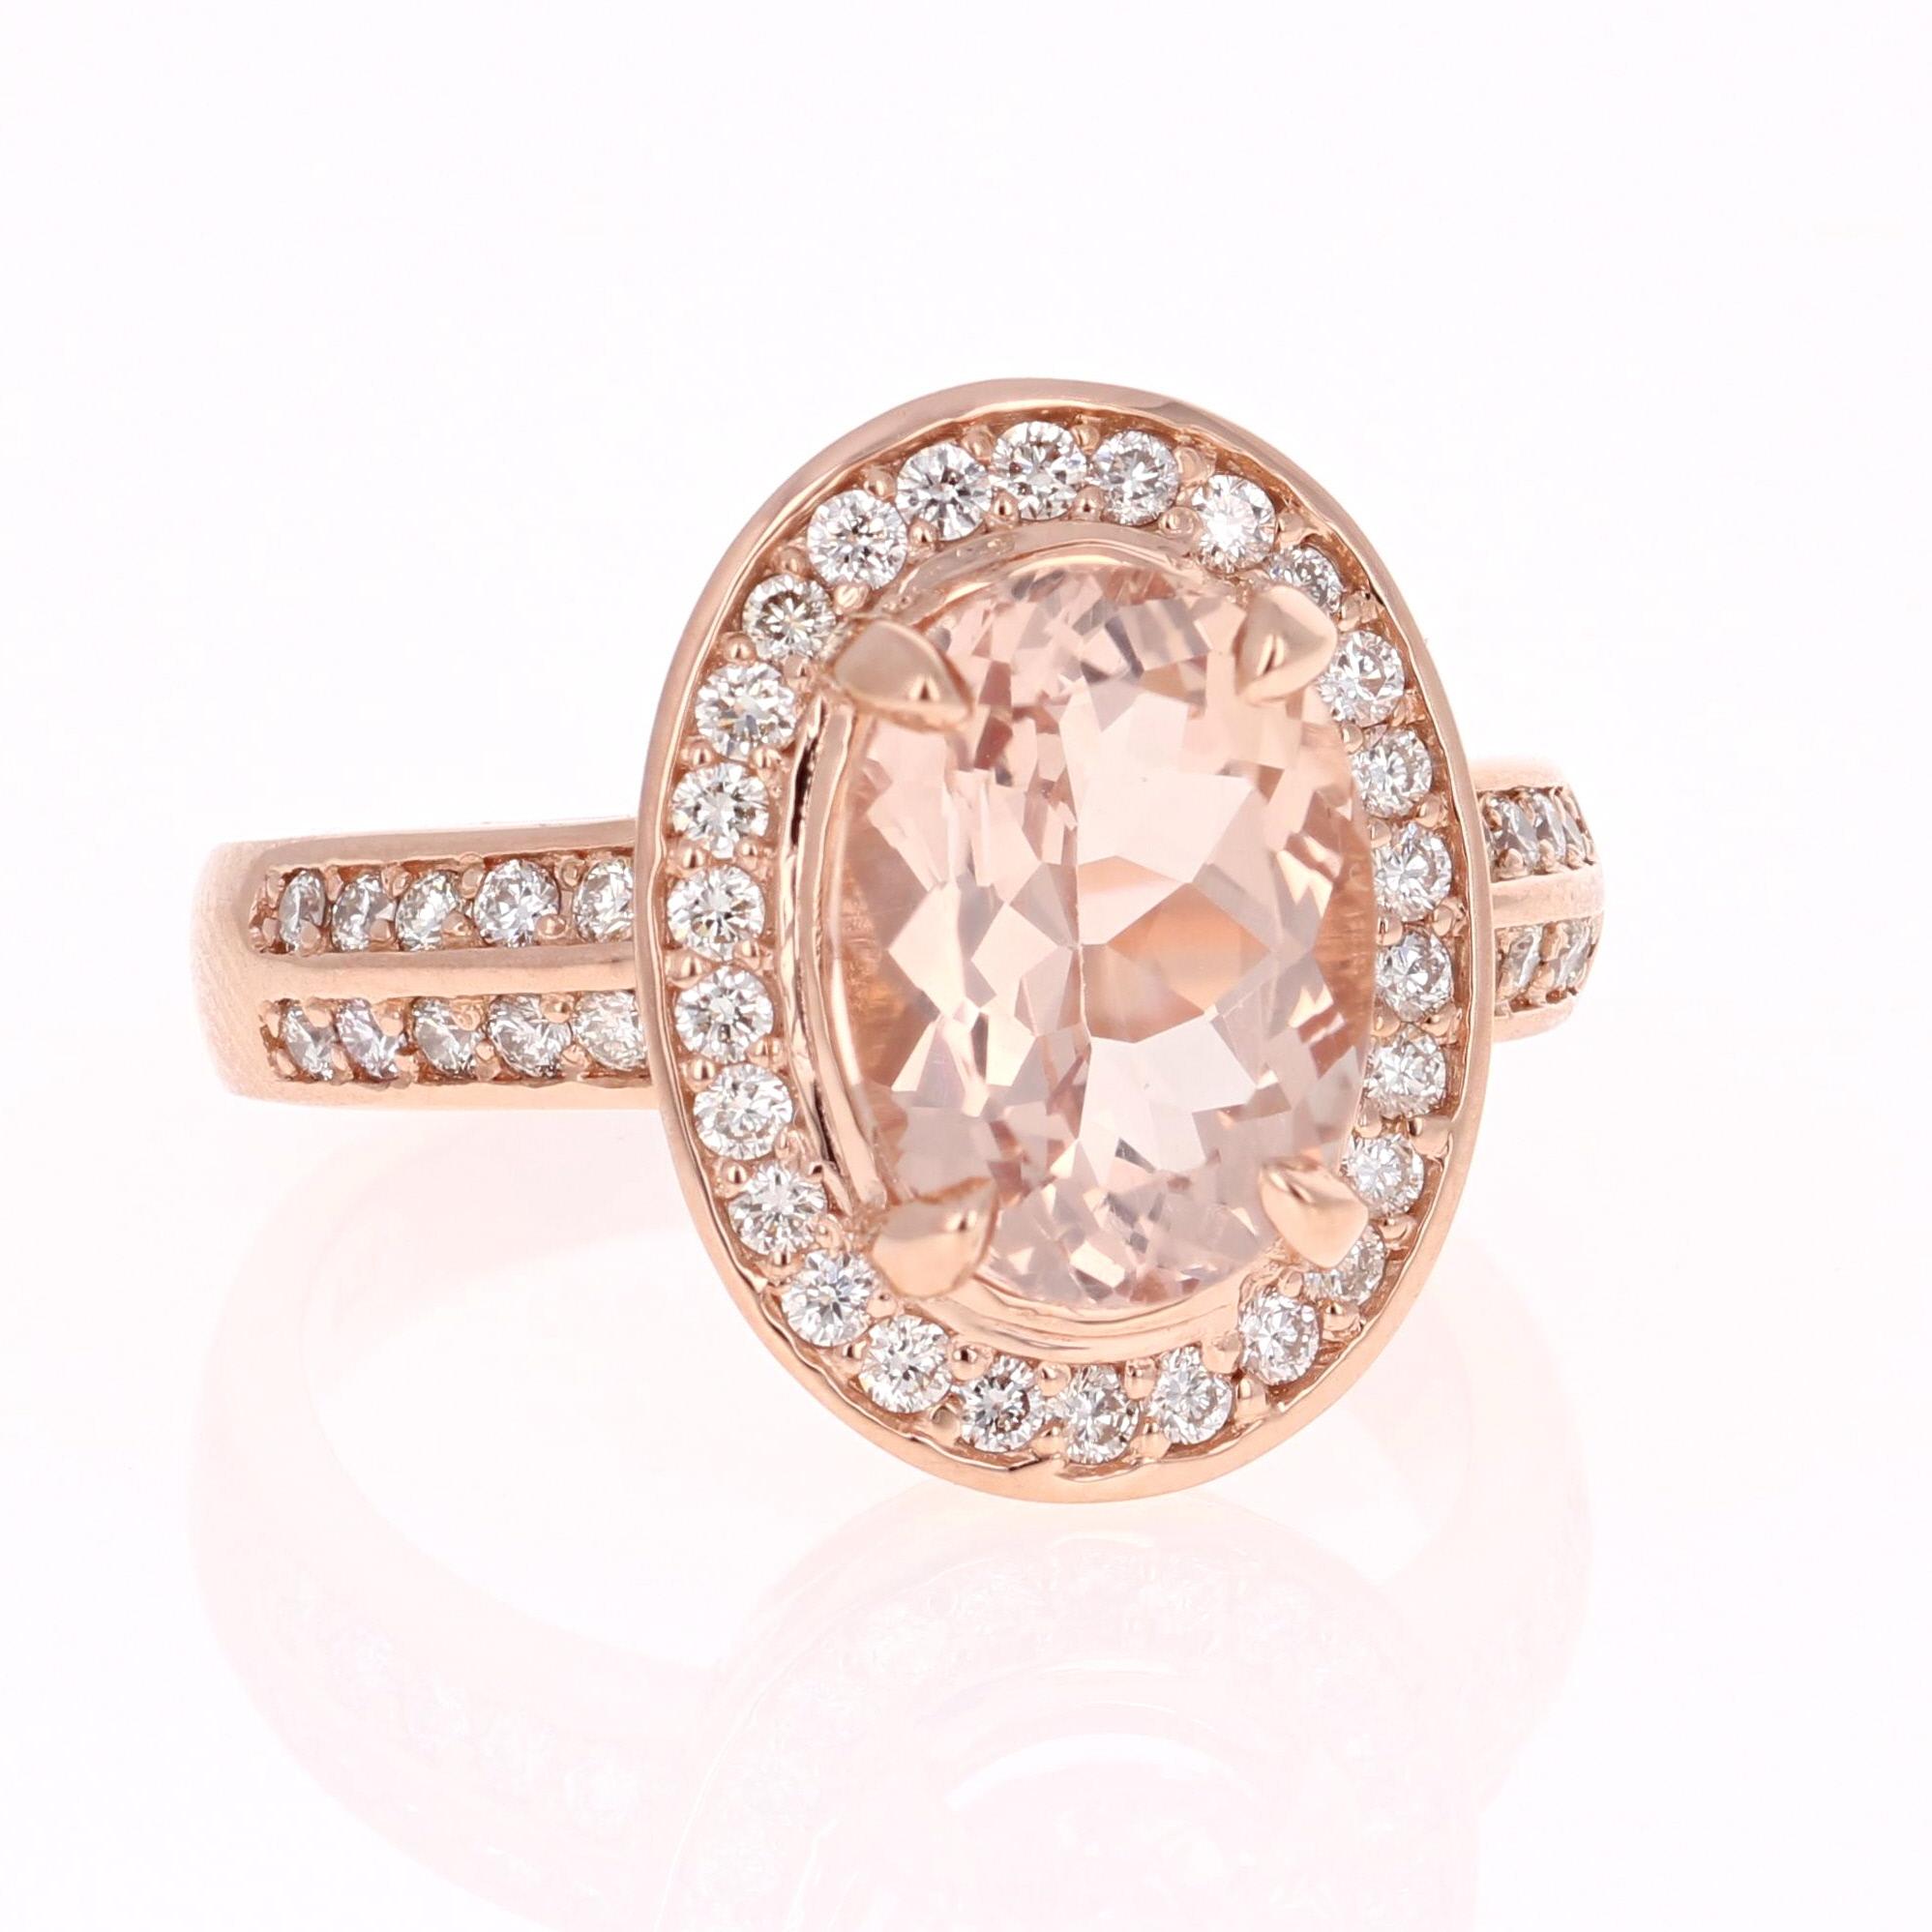 This ring is a 14K Rose Gold Ring which has a 3.11 carat Oval Cut Morganite in the center of the ring.  This ring is surrounded by 46 Round Cut Diamonds that weigh a total of 0.57 carats (Clarity: VS2, Color: H).  The total carat weight of the ring